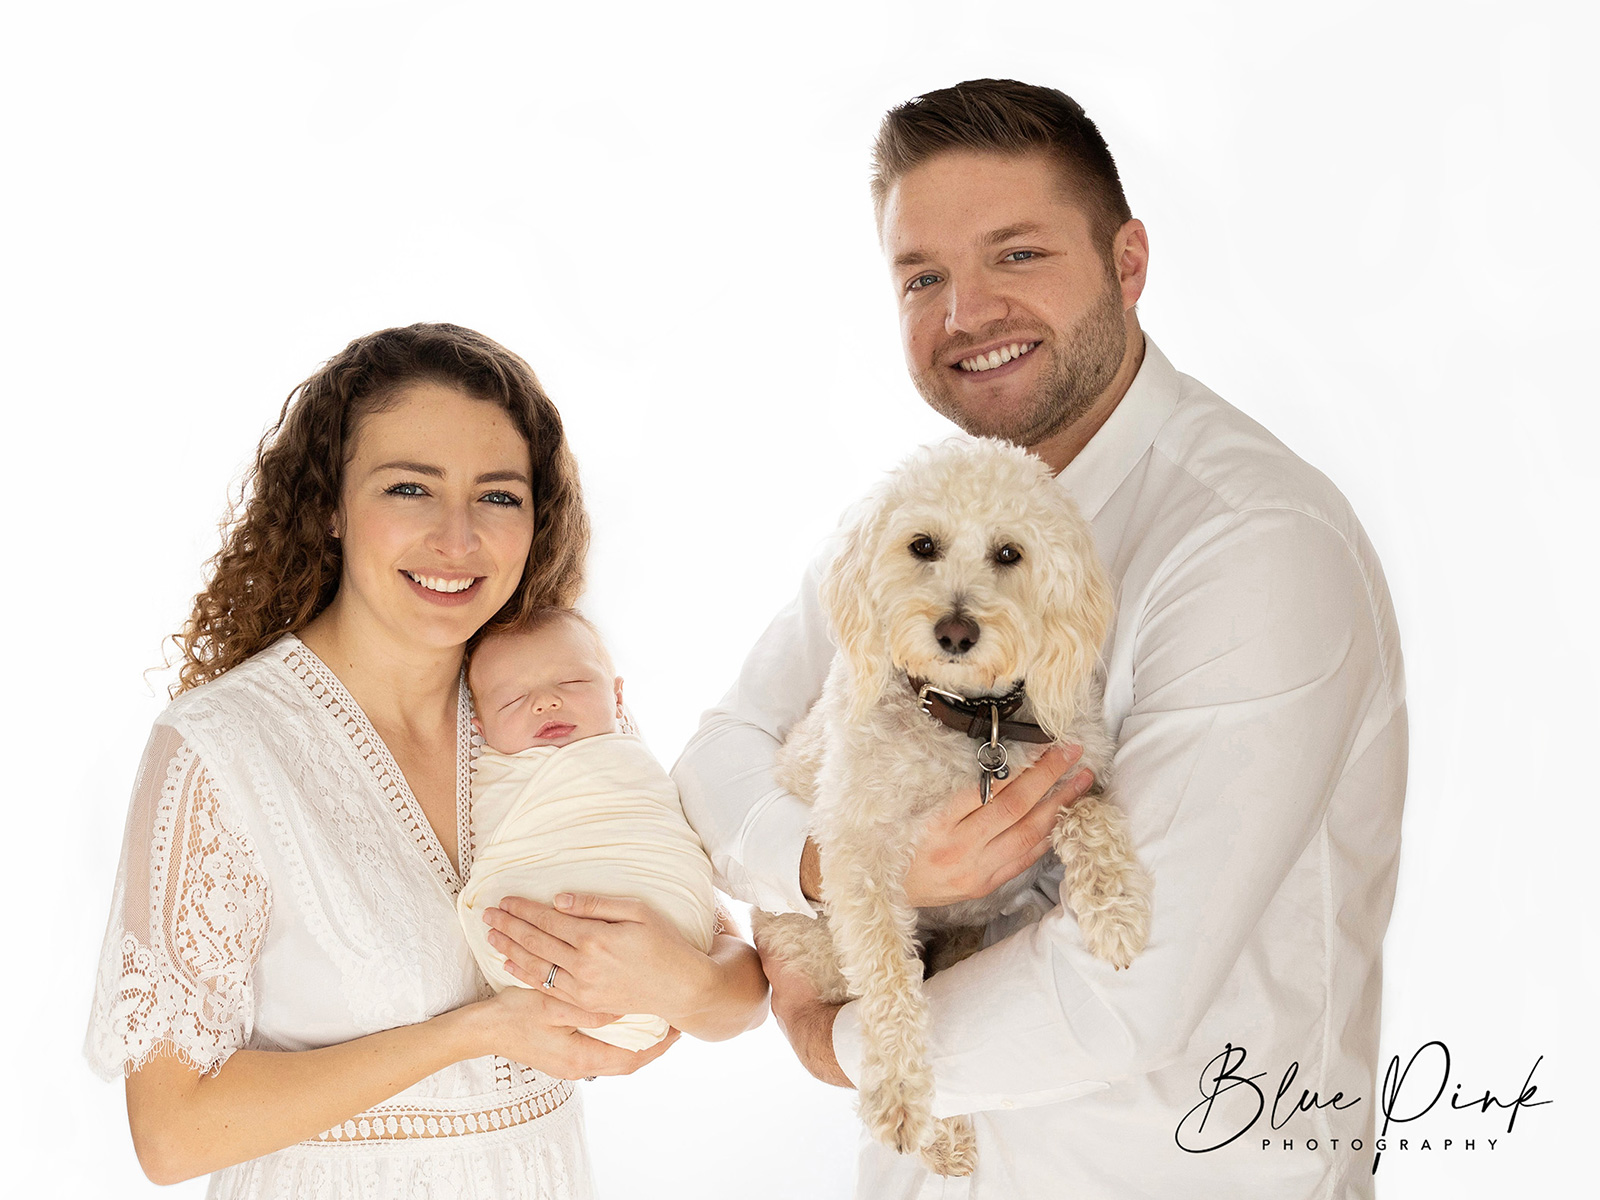 Maternity and New Born Photography In Essex